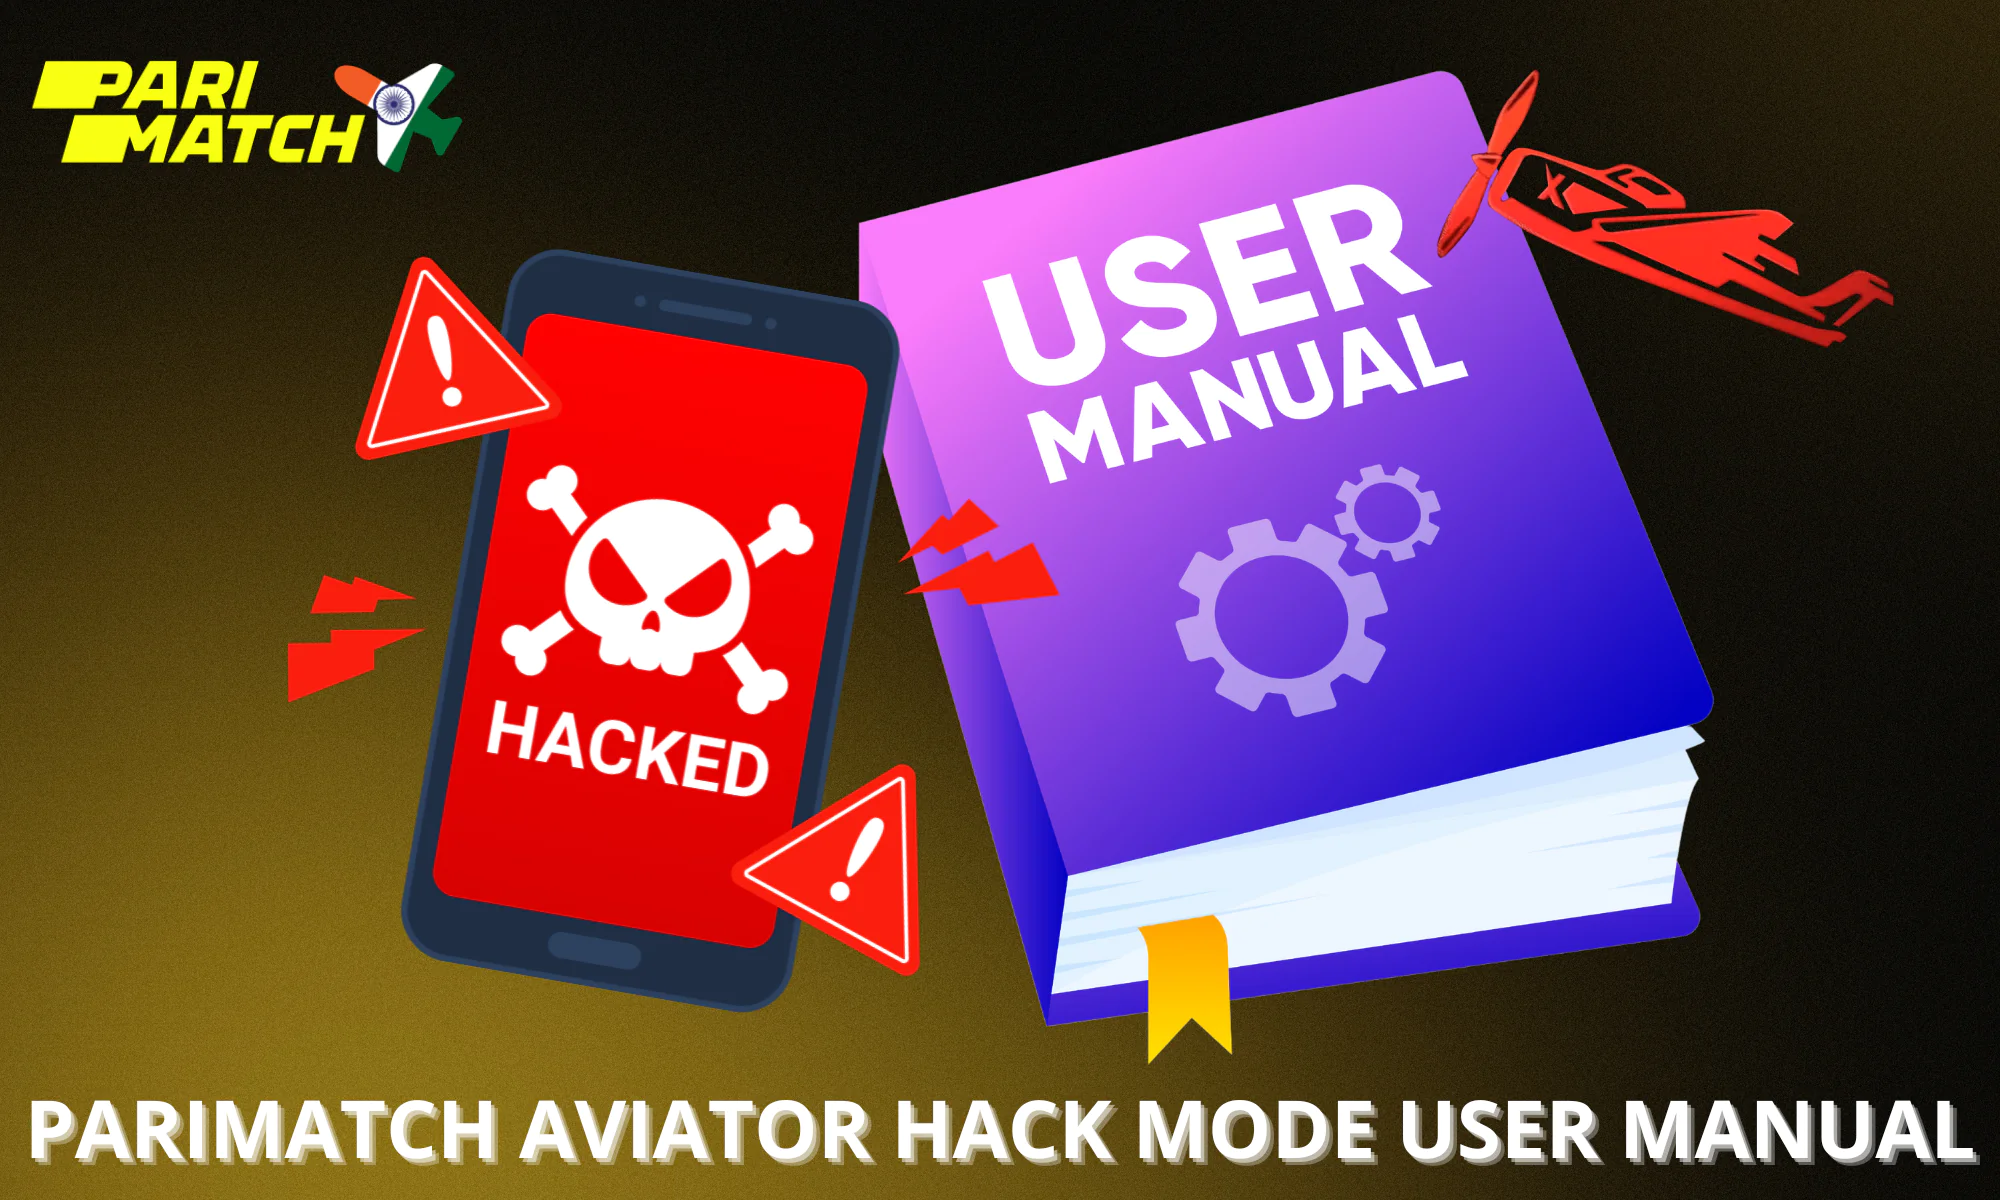 Detailed instructions for using the Parimatch Aviator hacking program